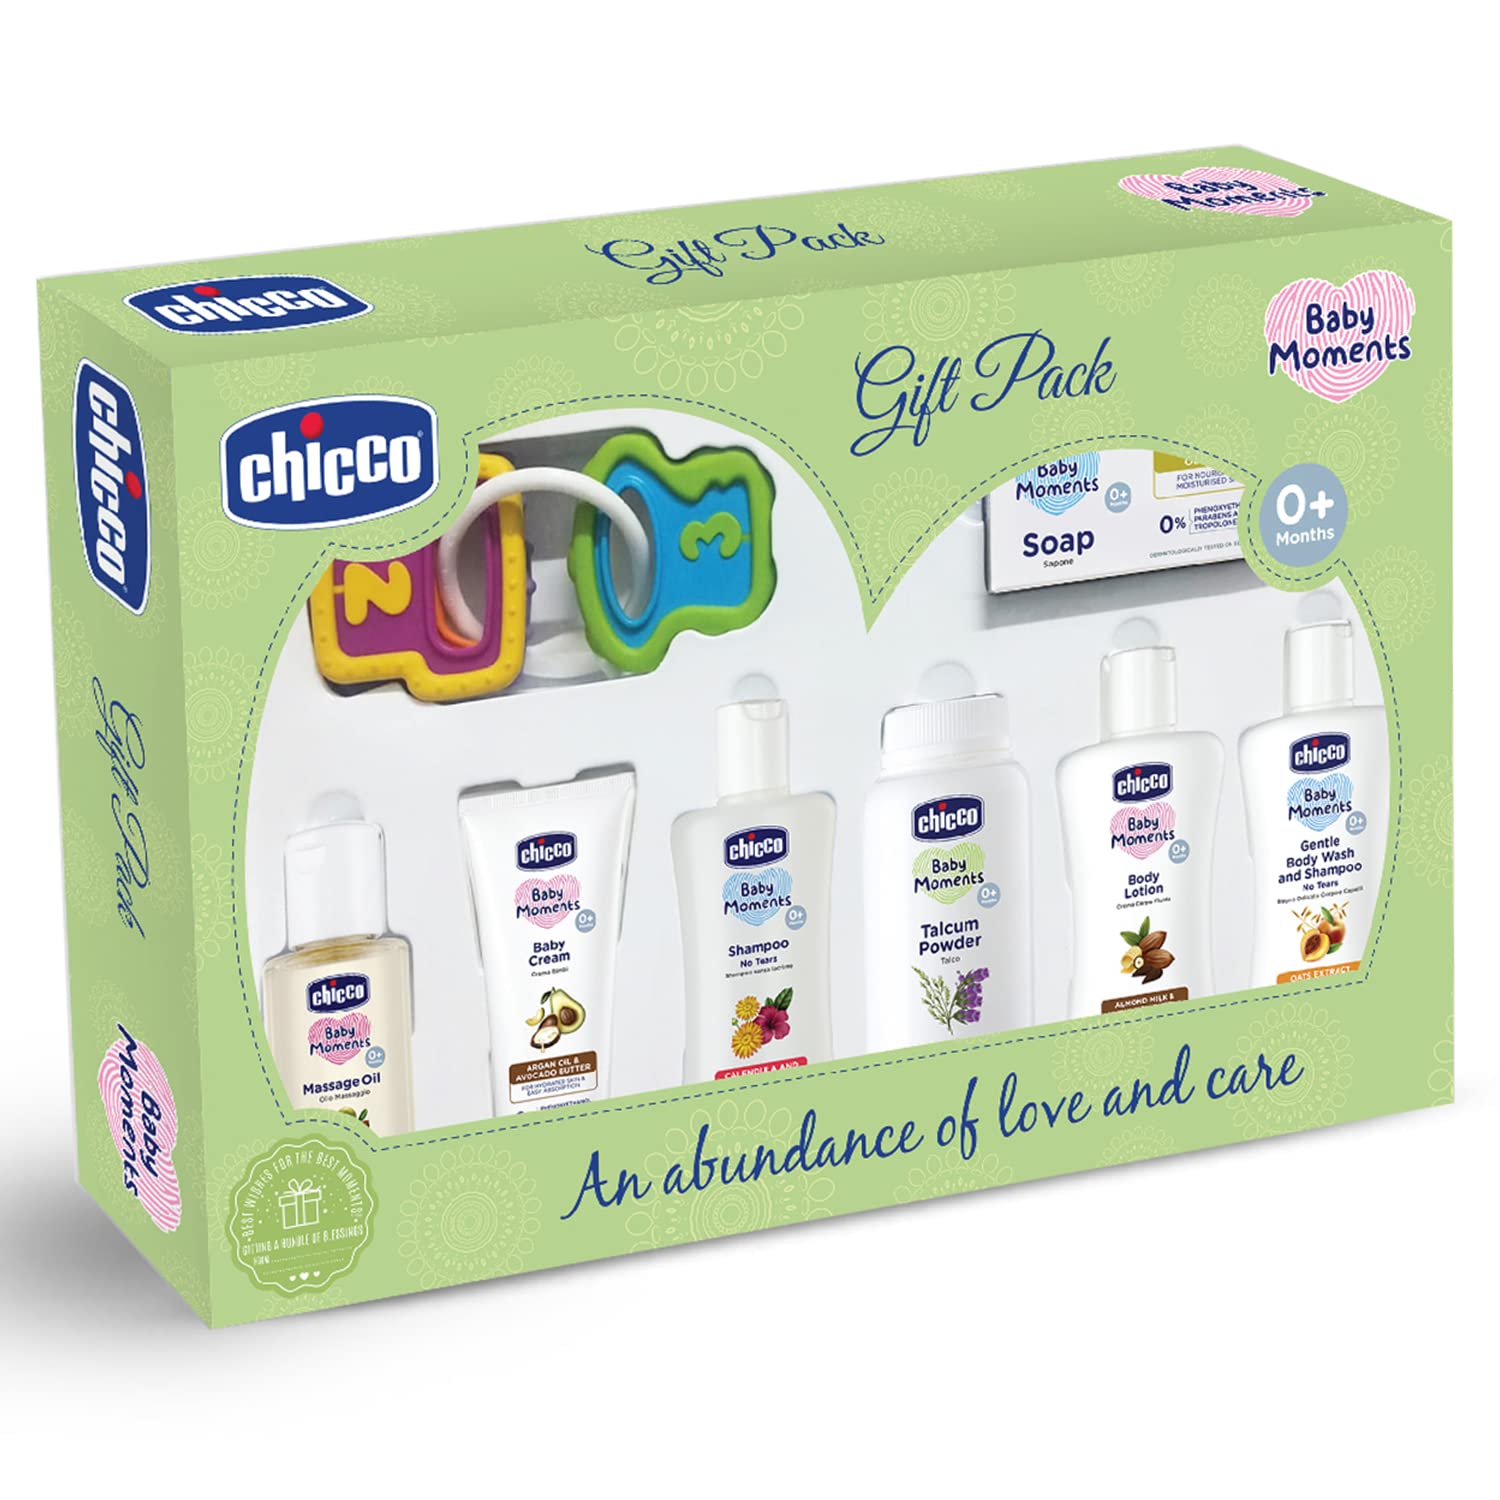 Chicco Baby Moments Delight Gift Pack Green,